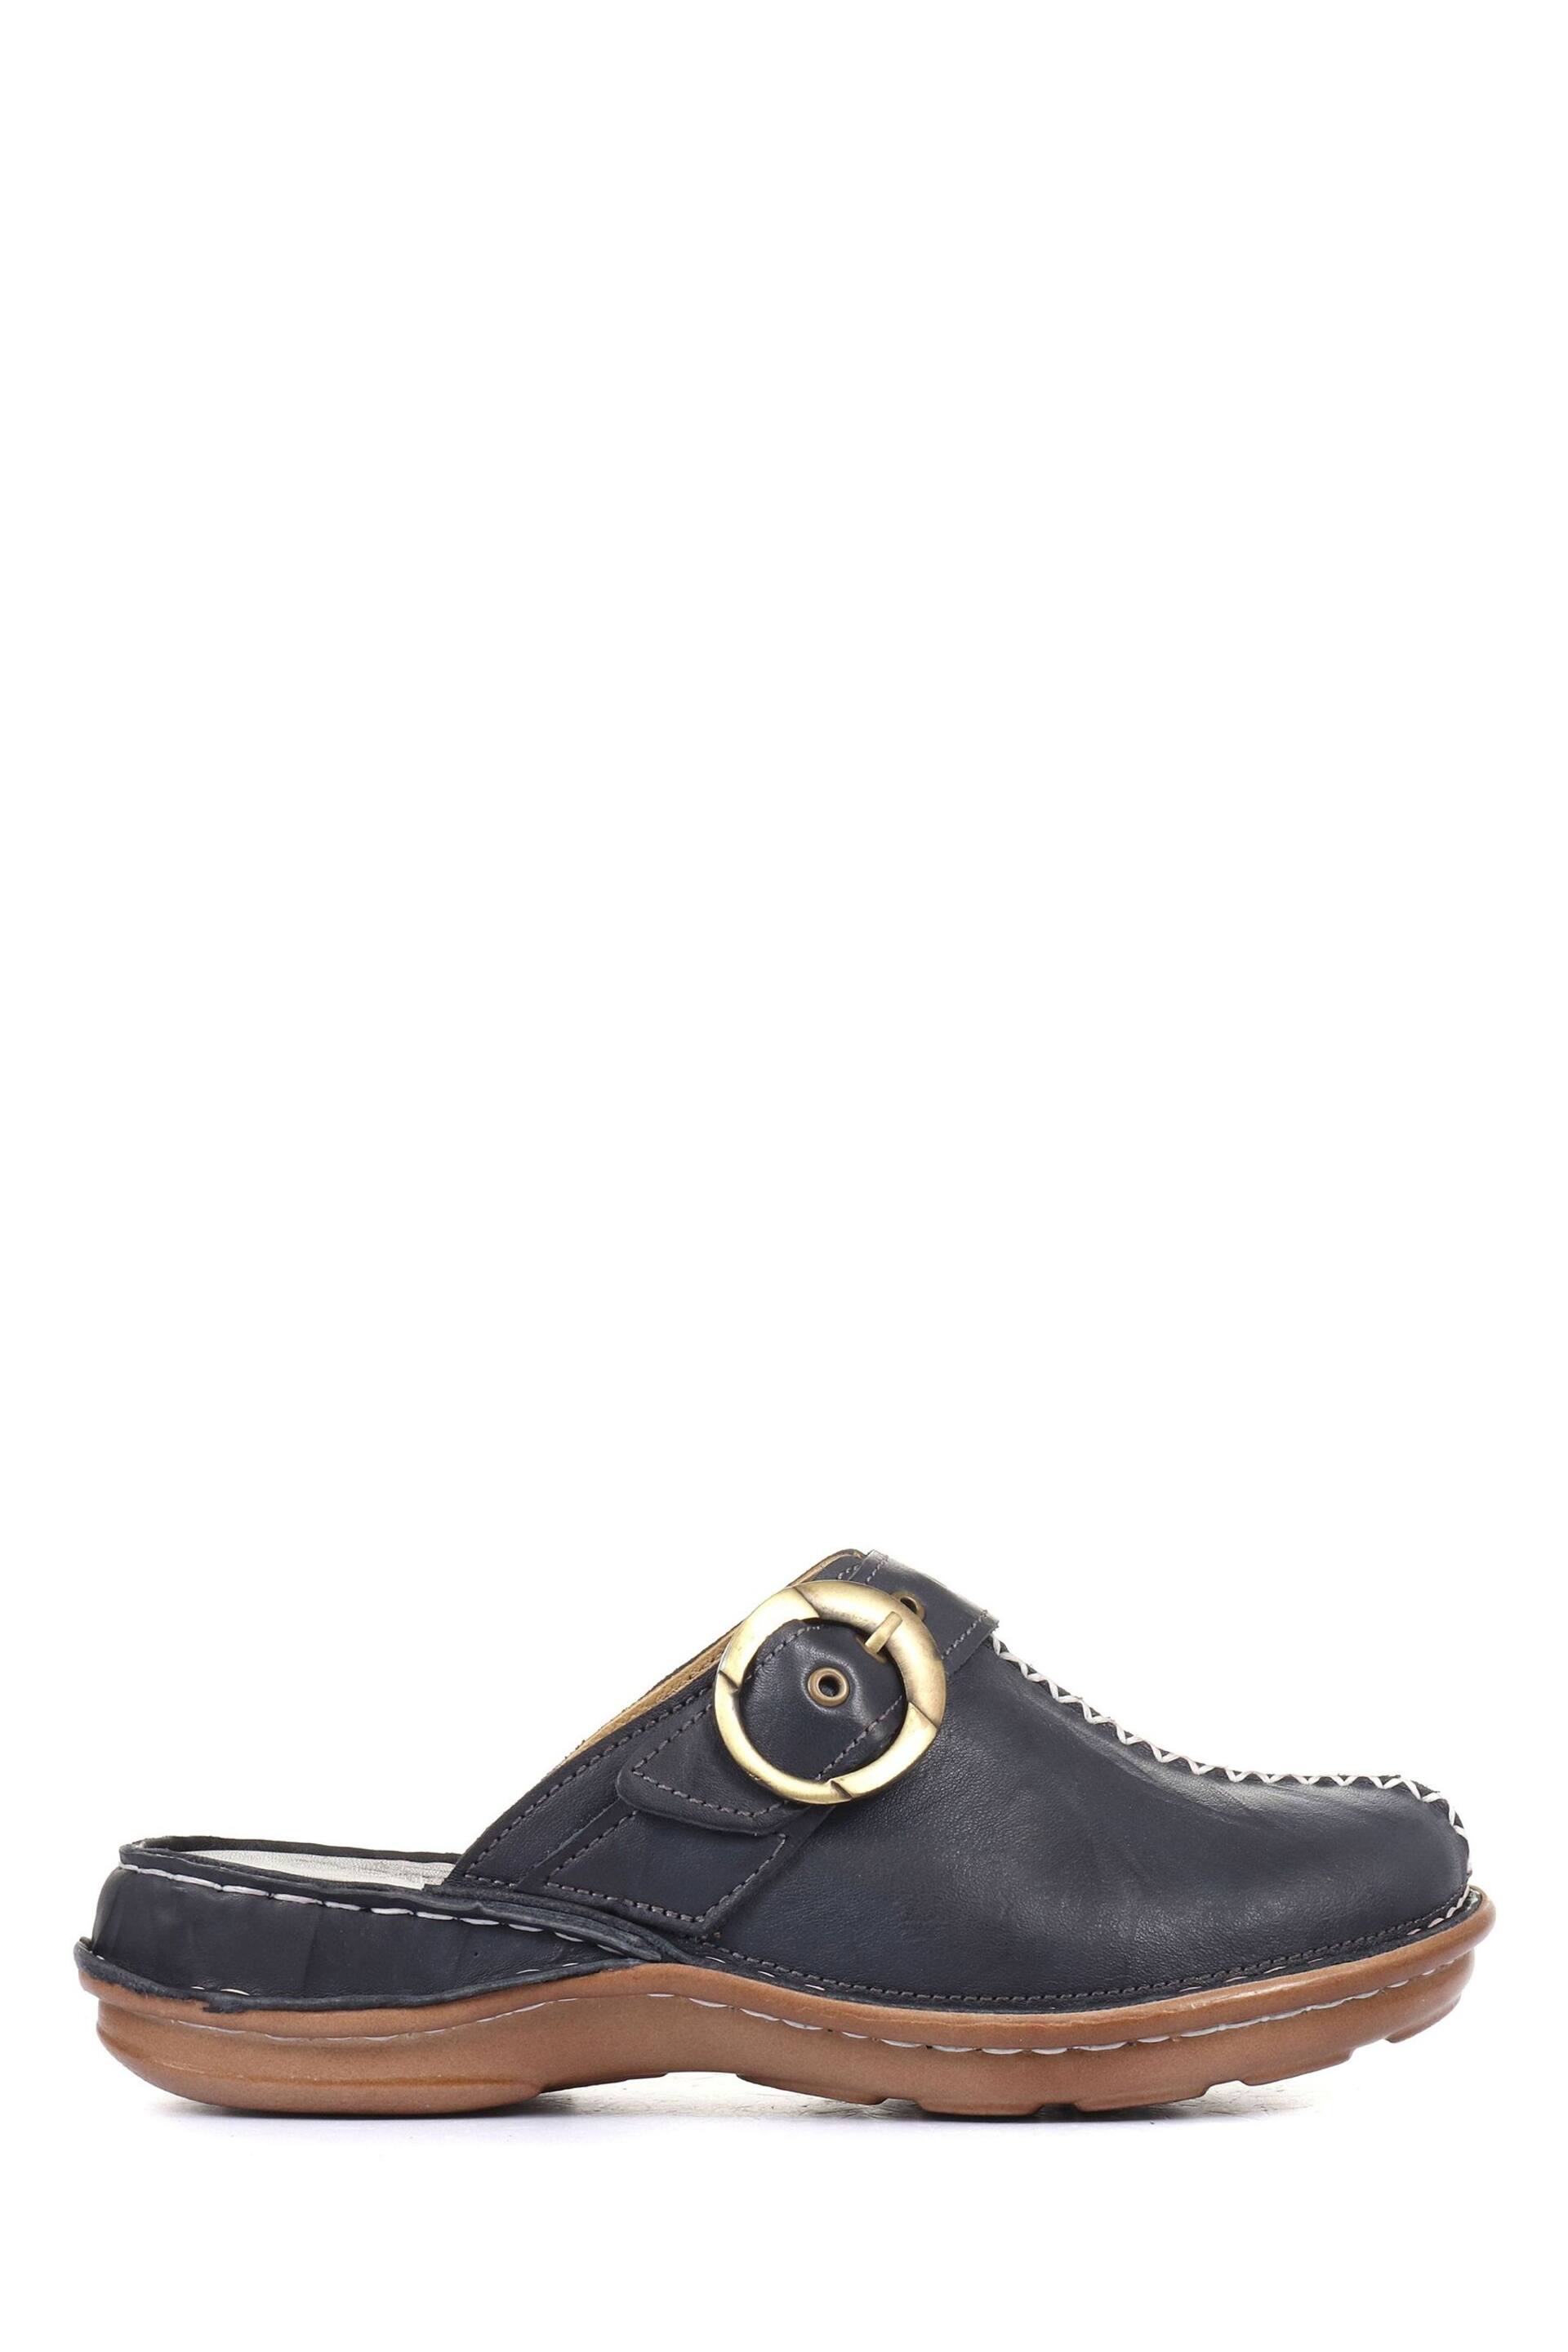 Pavers Navy Ladies Lightweight Leather Clogs - Image 1 of 5